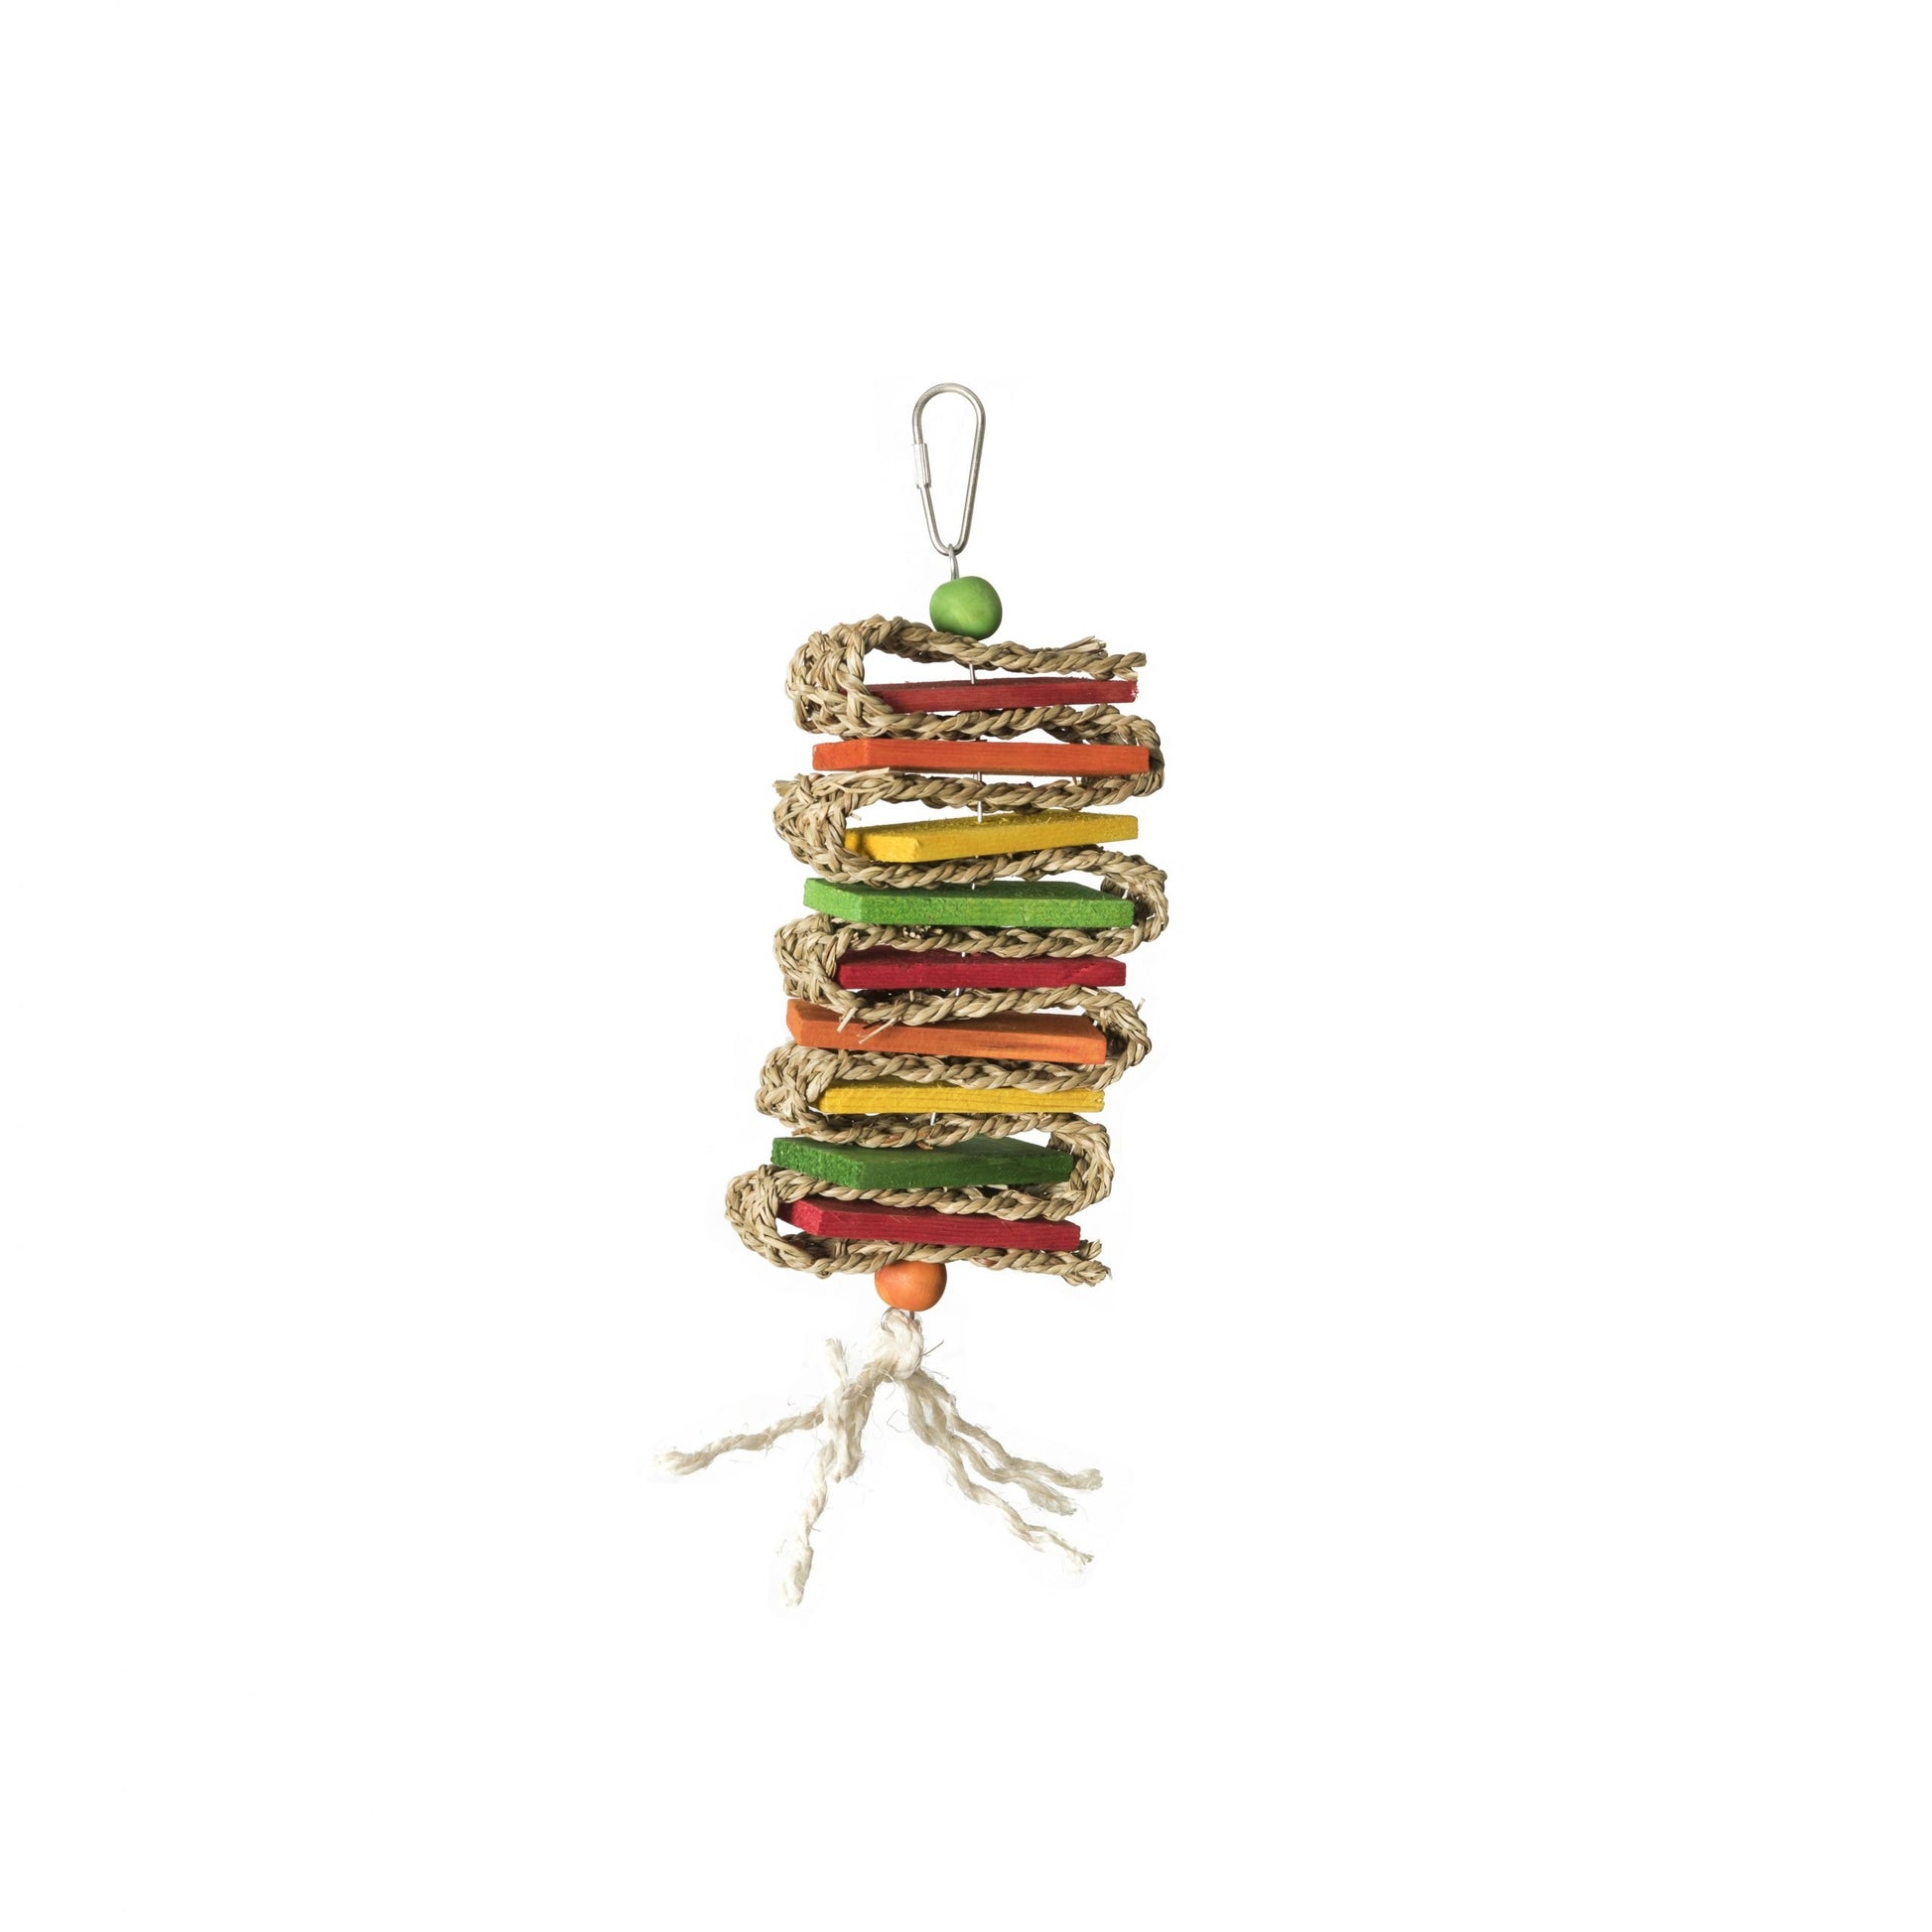 Large grass woven stack bird cage toy